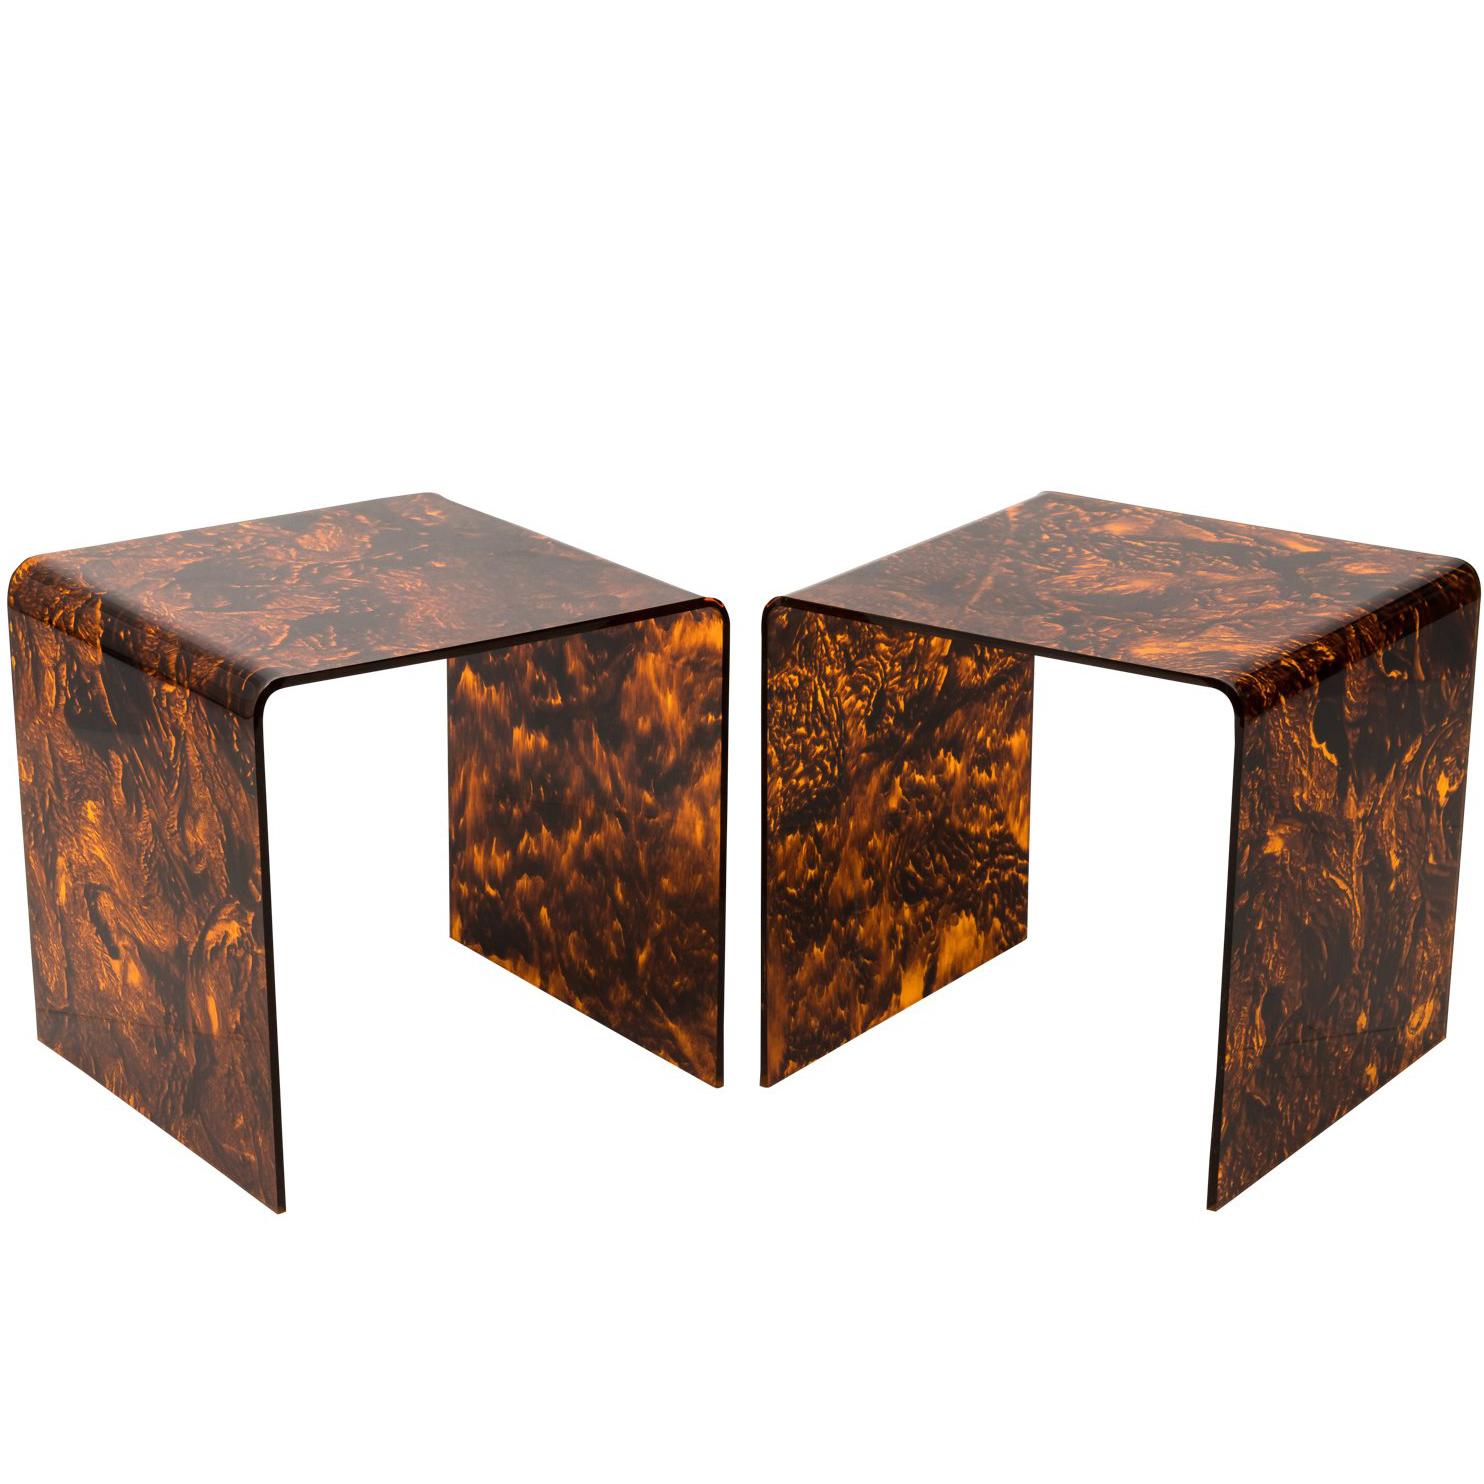 Pair of Faux Tortoise Lucite Side Tables, circa 1970